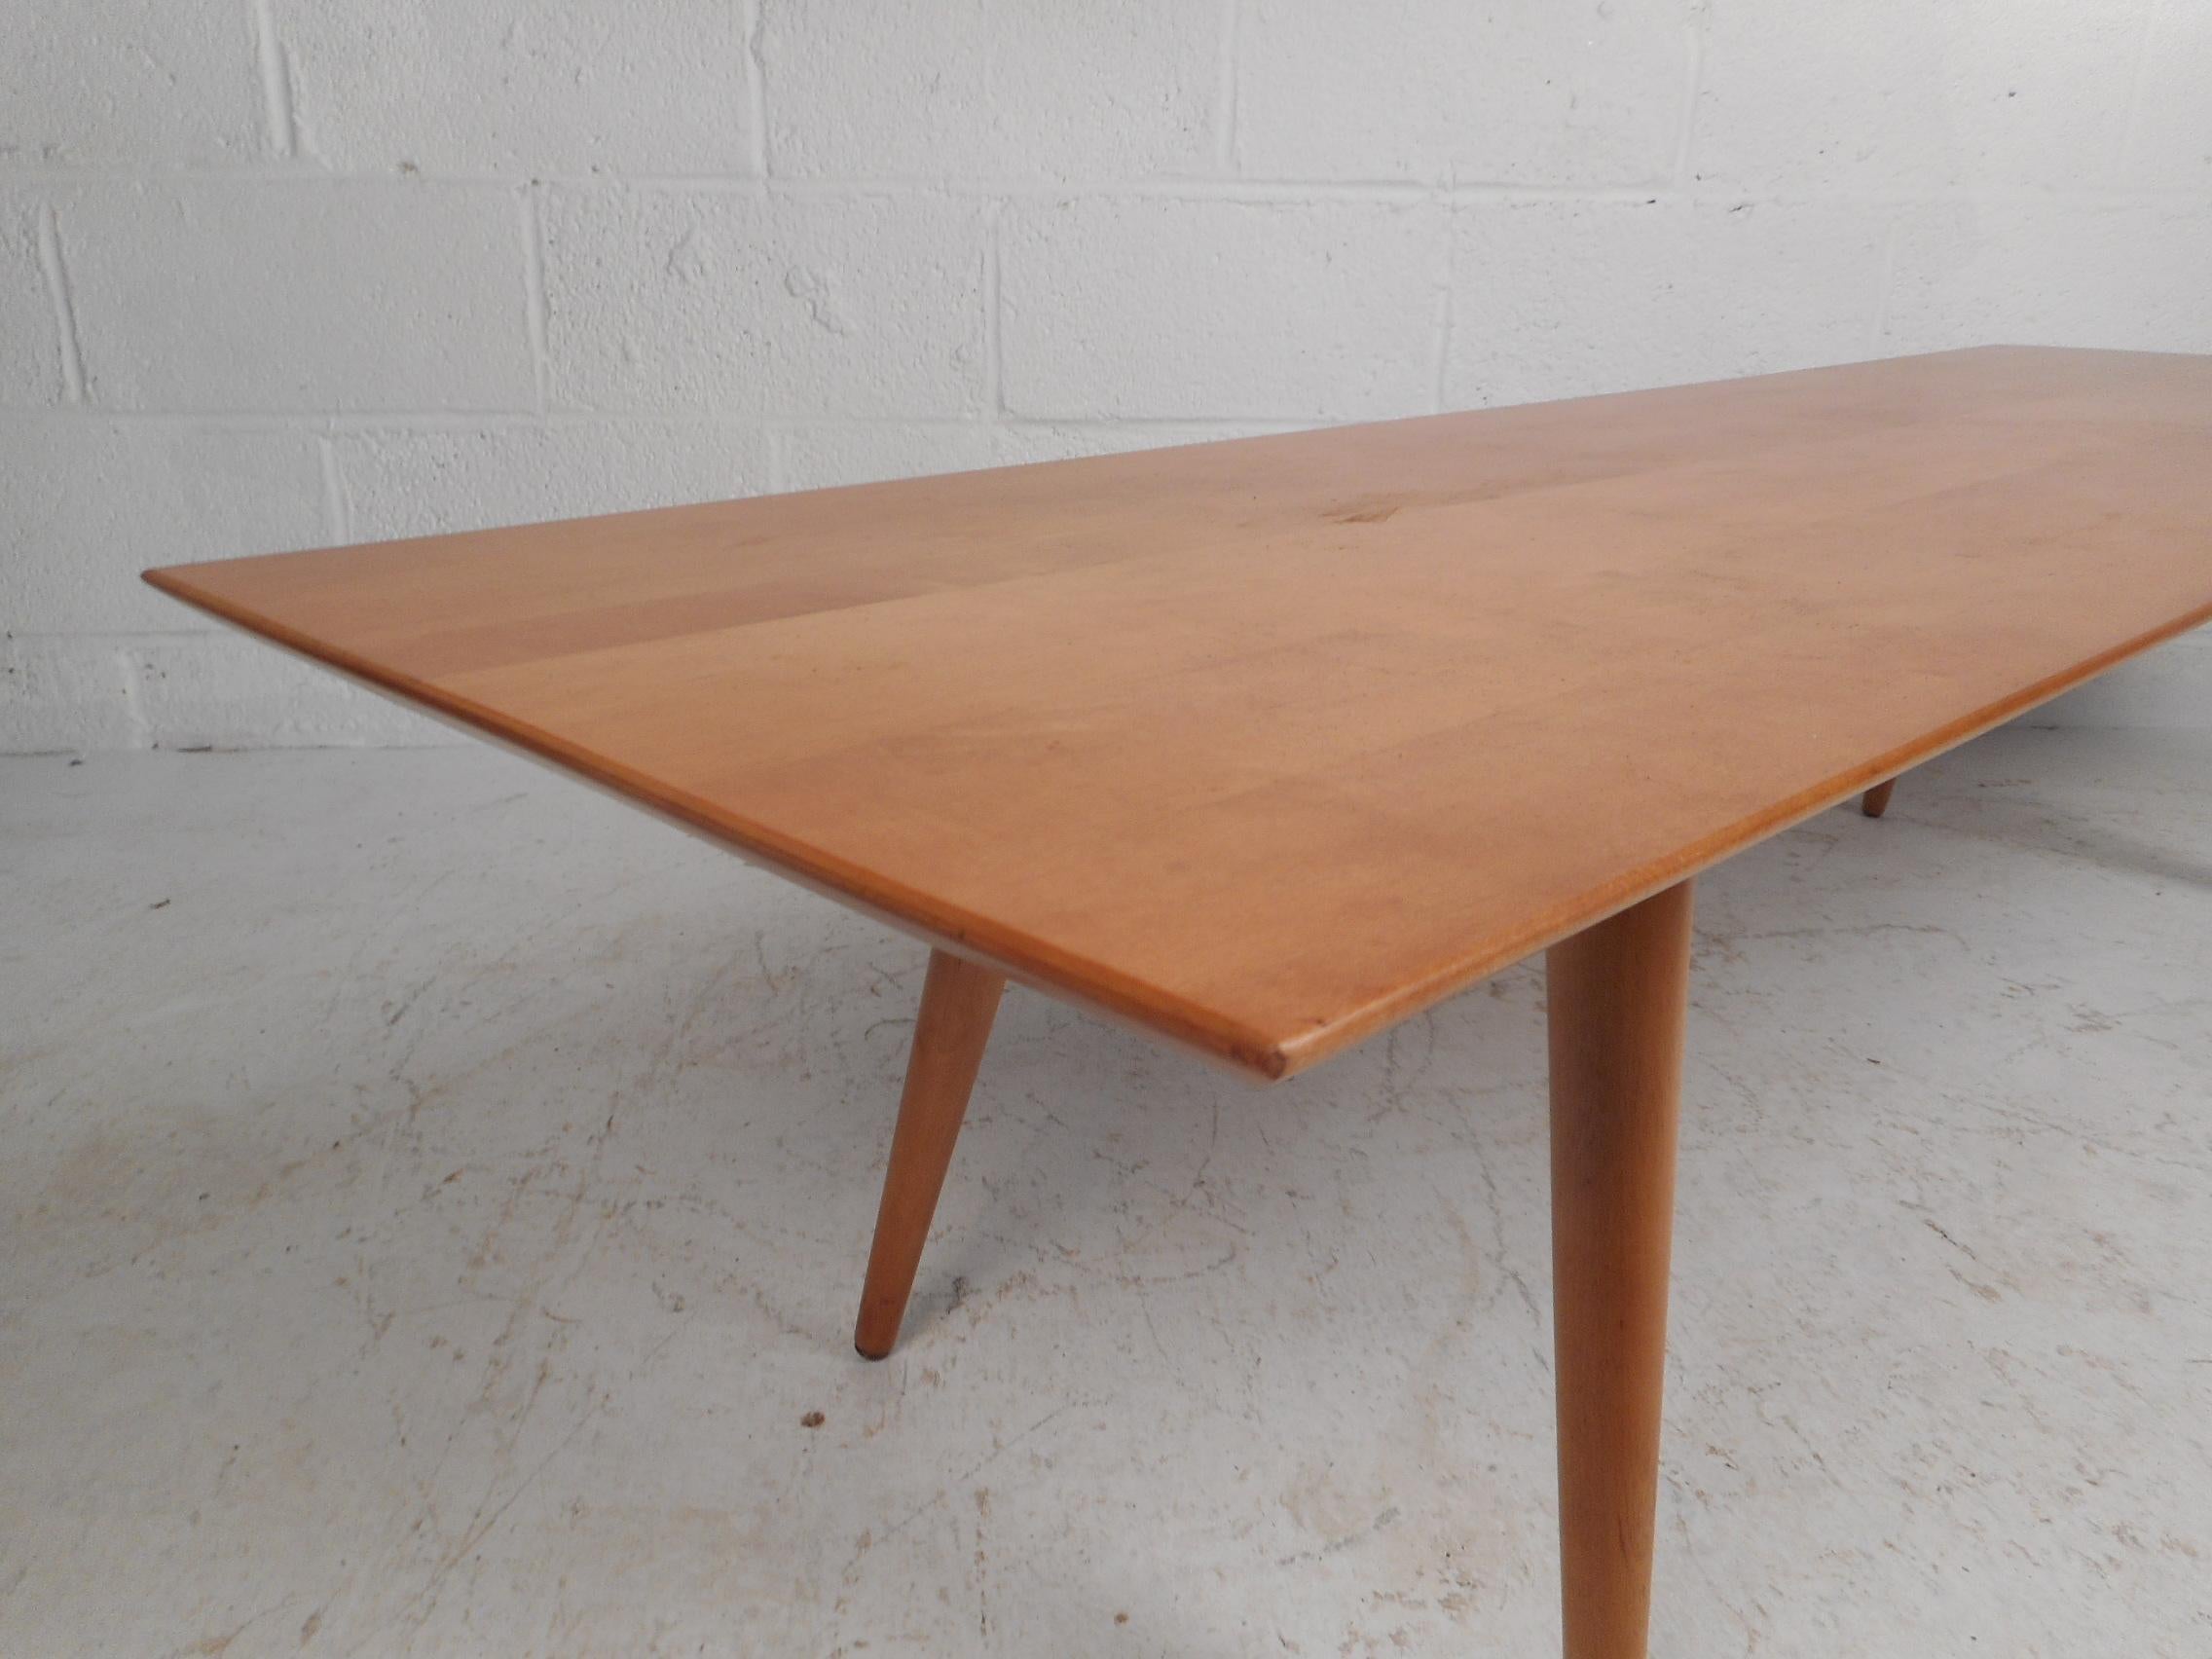 Mid-Century Modern Paul McCobb Coffee Table In Good Condition For Sale In Brooklyn, NY